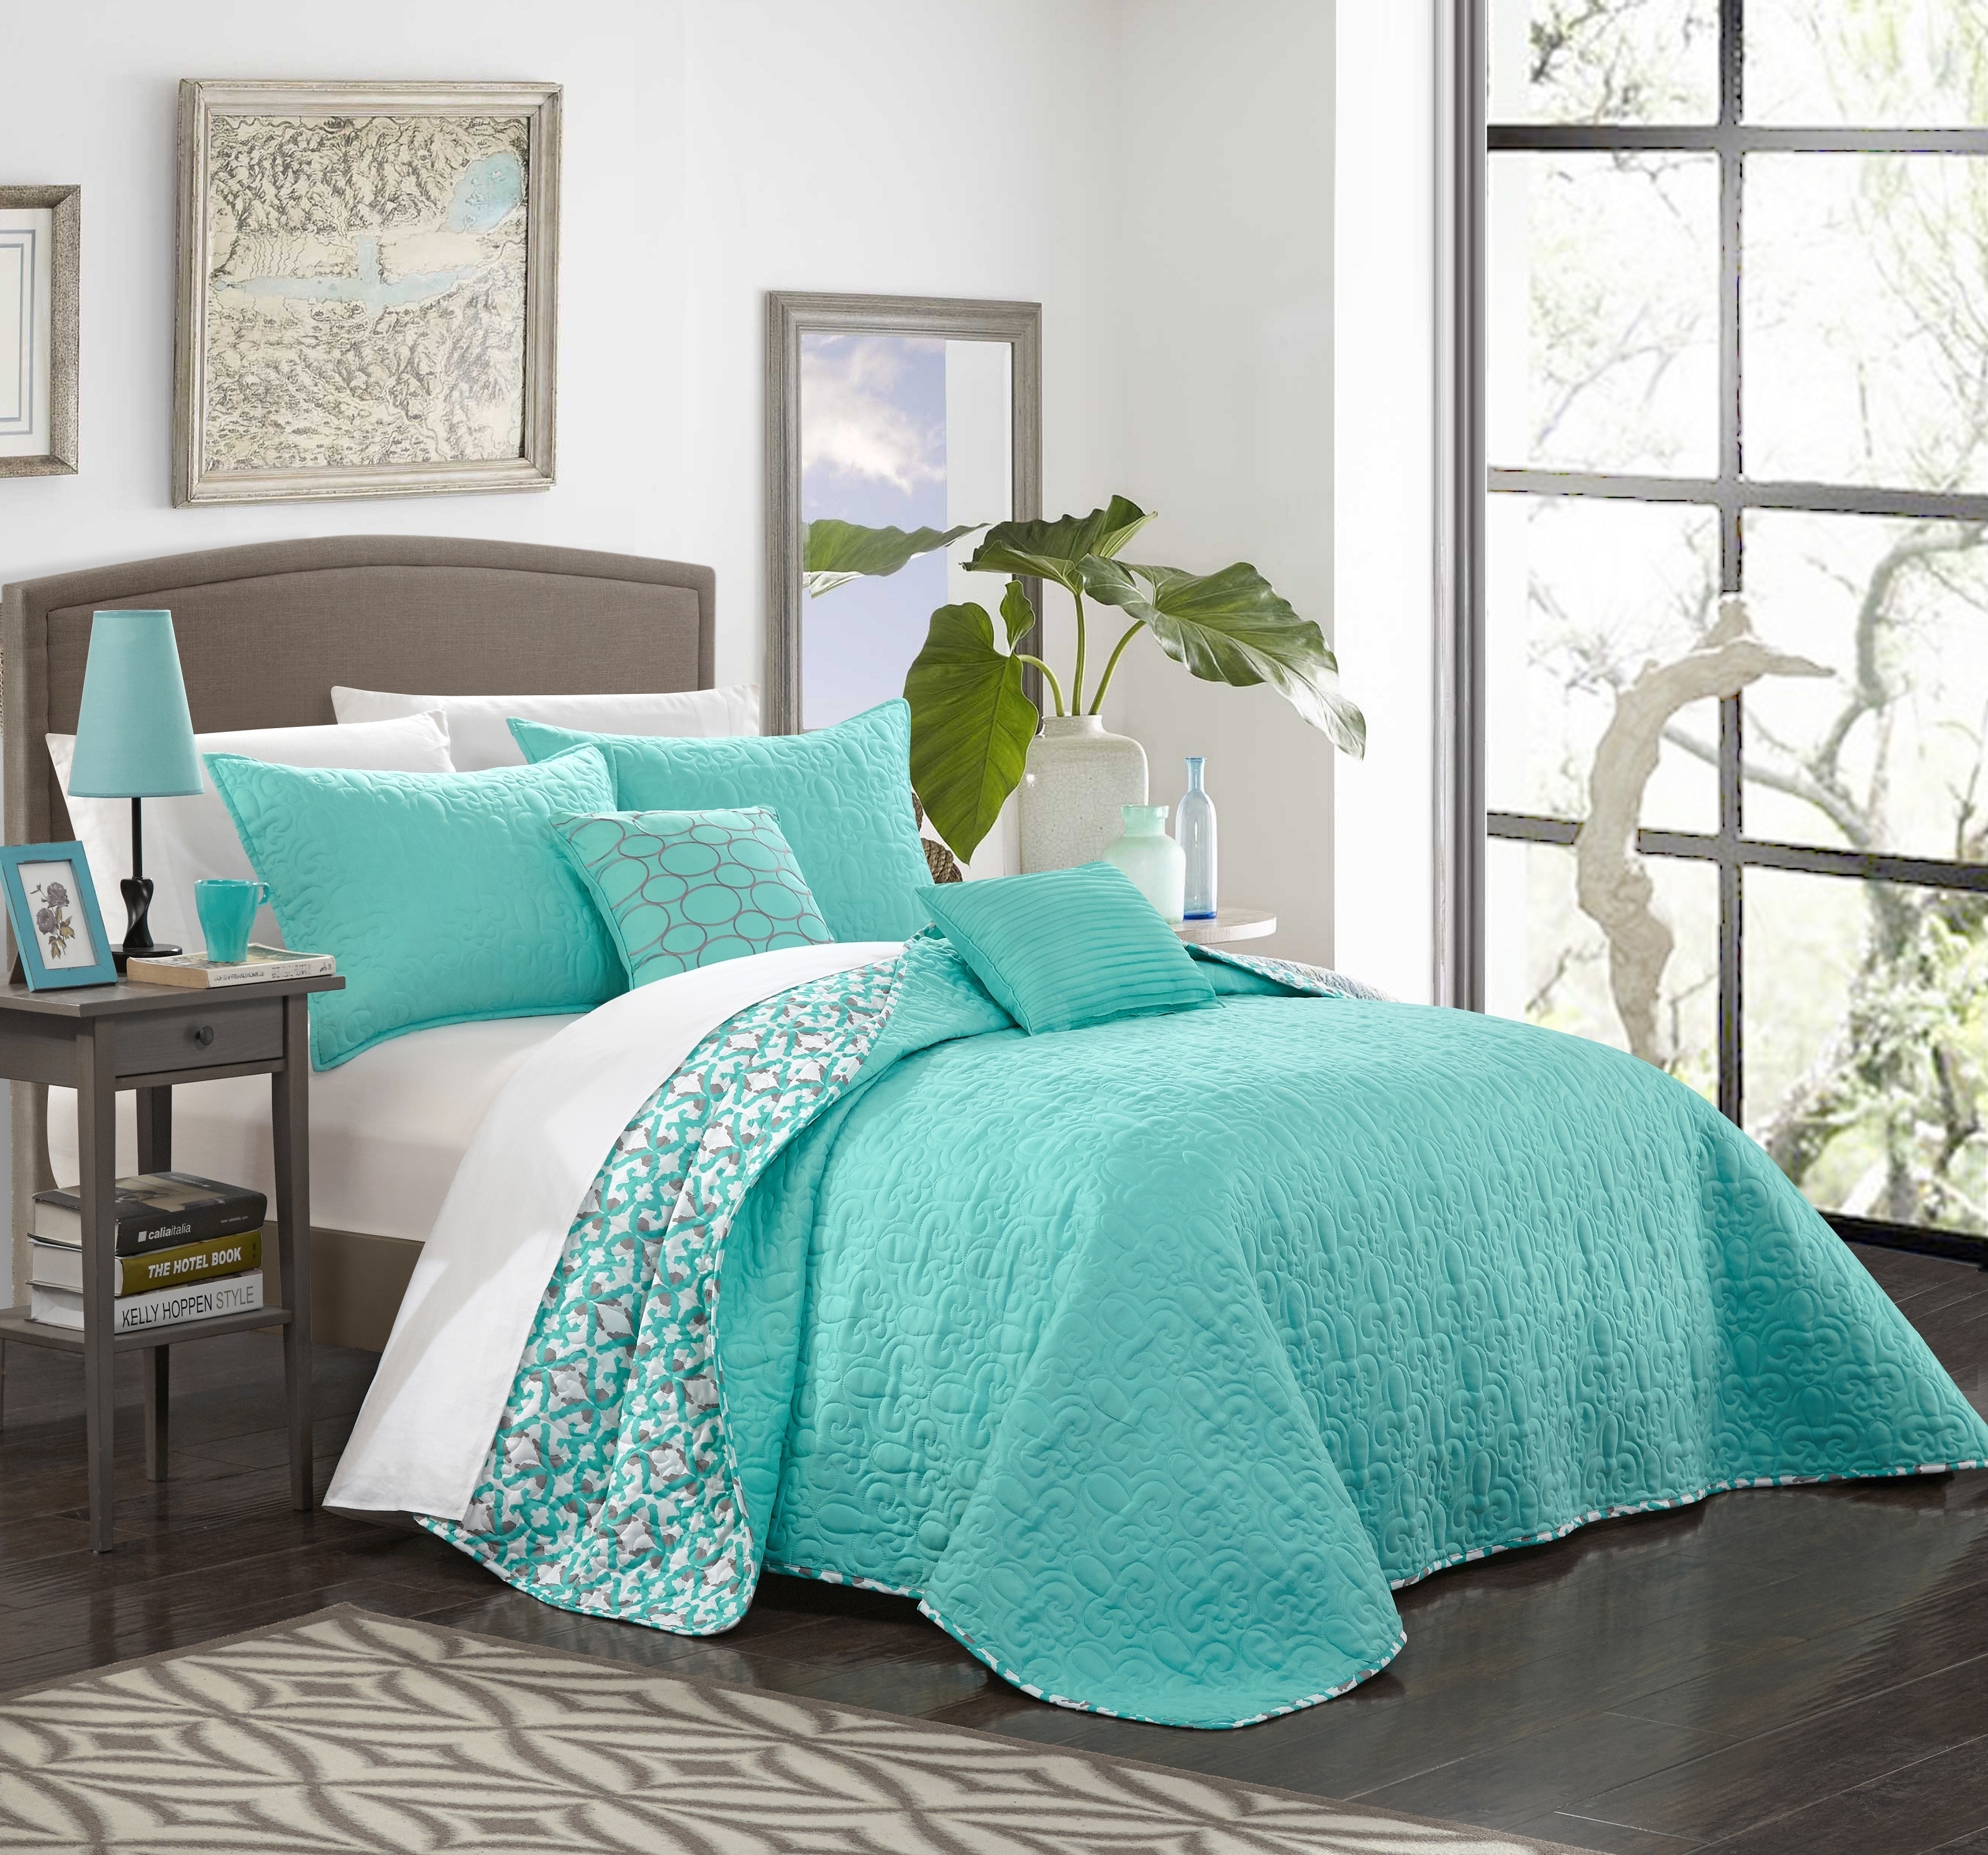 5 Piece Nalla Quilted Flor De Lis Patterned Reversible Printed Quilt Set, Shams And Decorative Pillows Included - Aqua, King